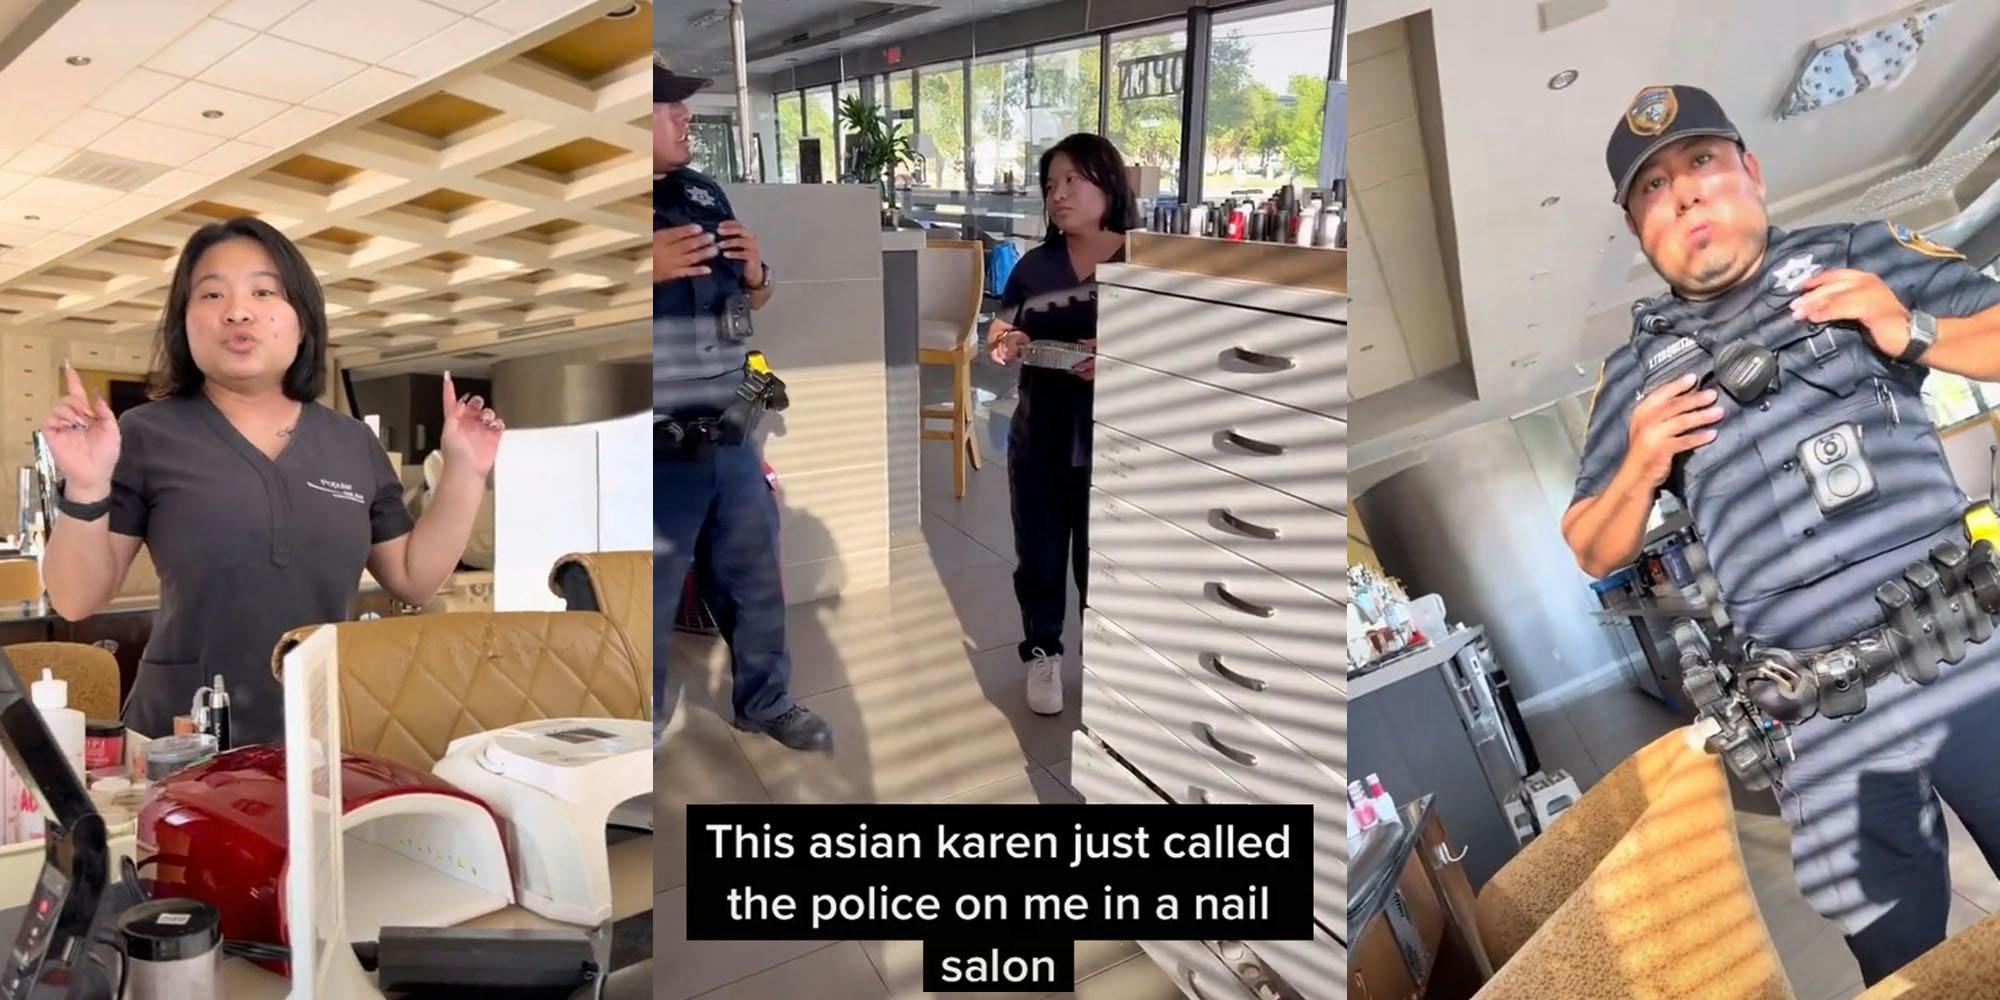 Nail salon worker speaking fingers pointed up (l) Nail salon worker speaking to police officer in salon caption 'This asian karen just called the police on me in a nail salon' (c) Police officer standing in salon (r)